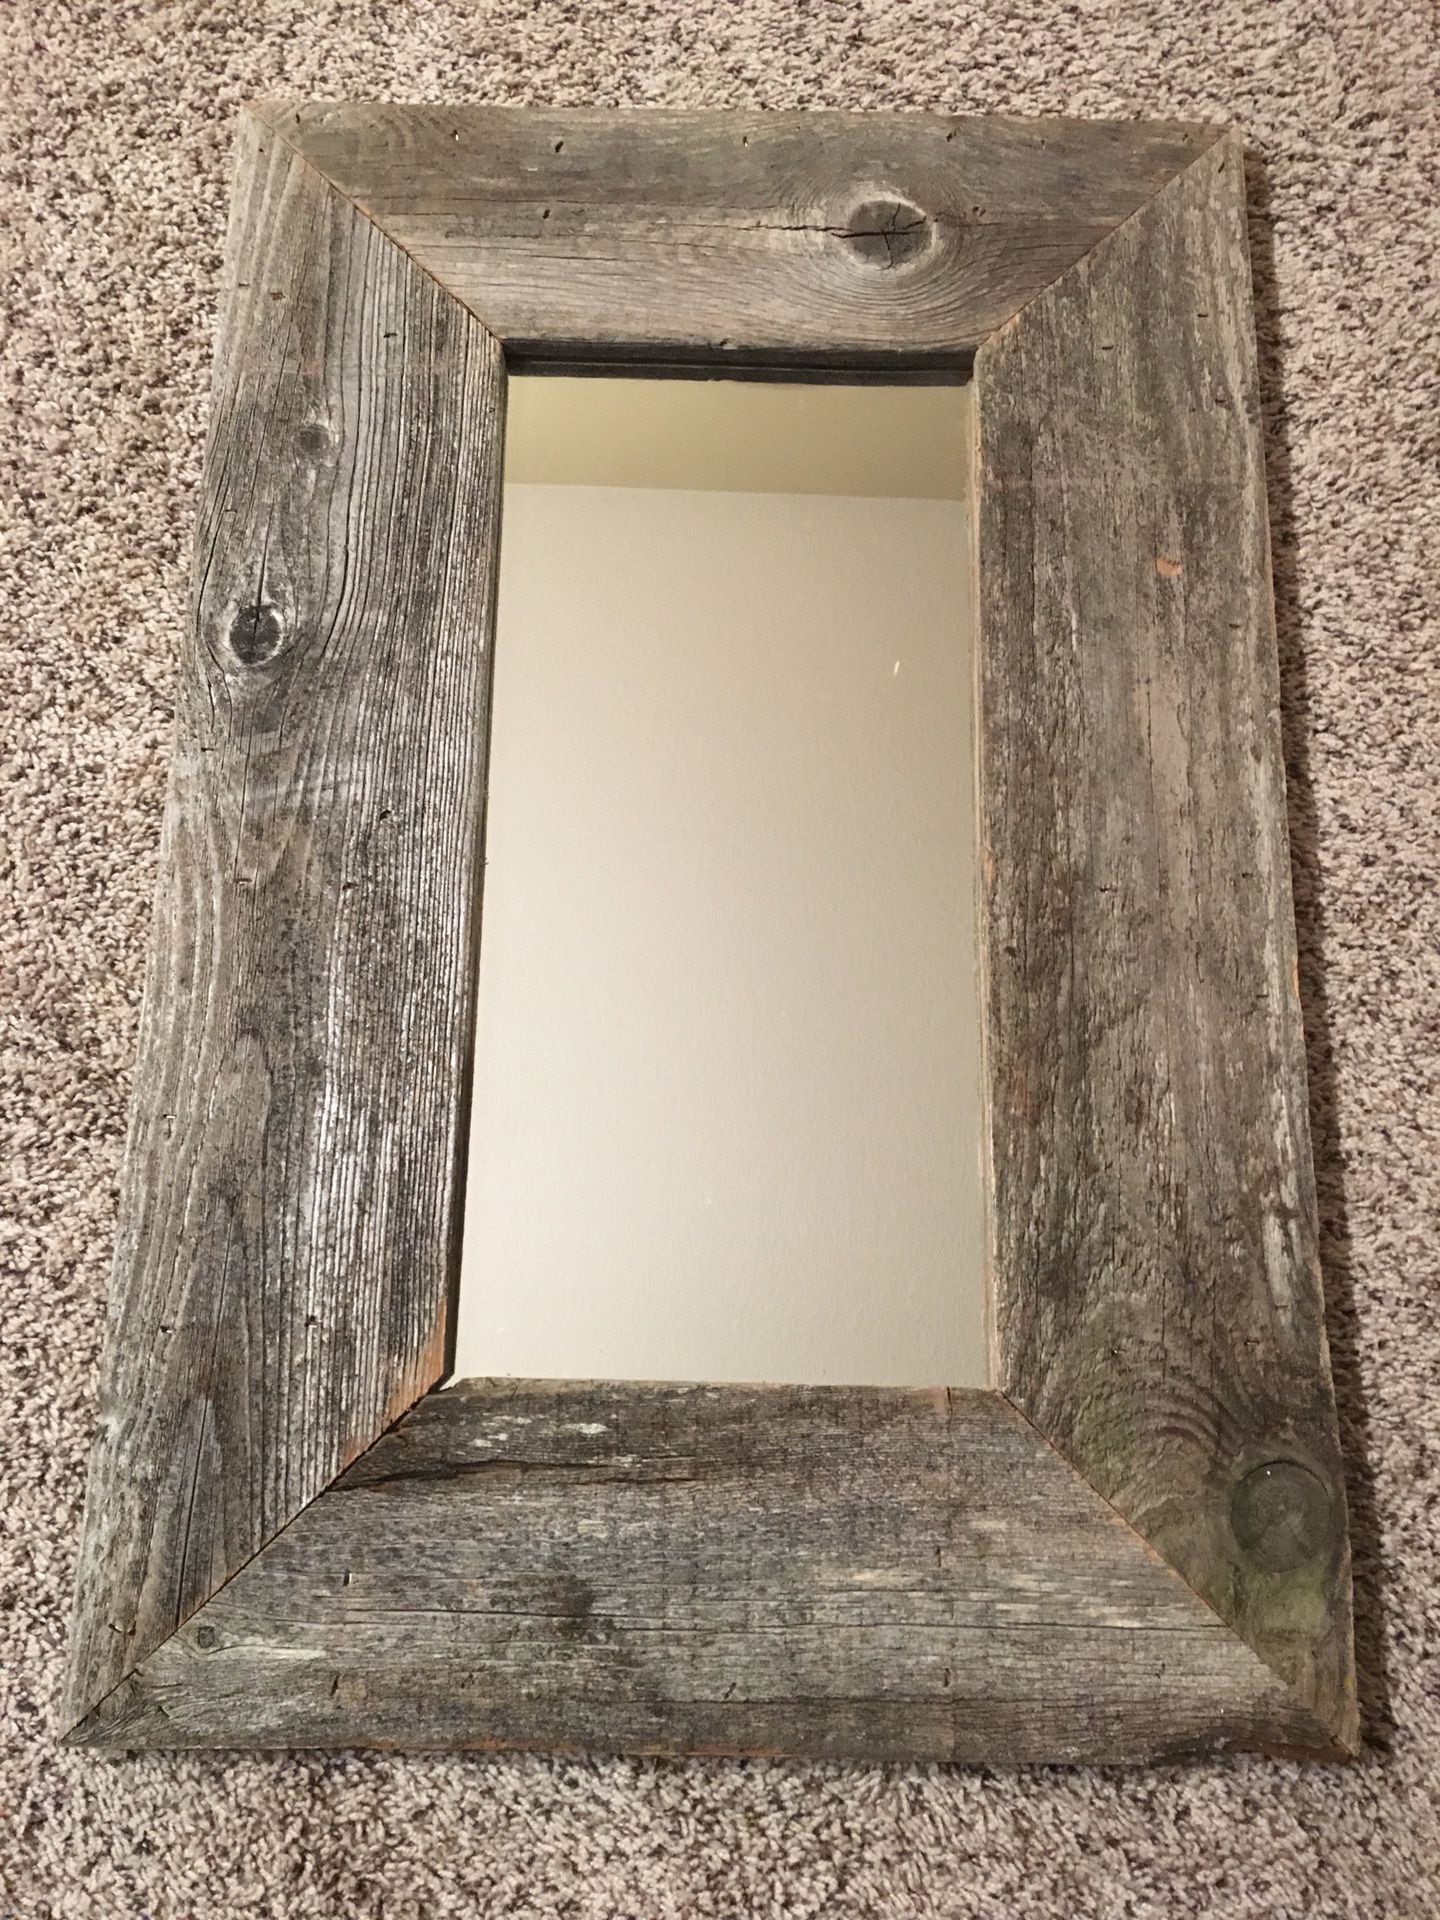 Mirror with recycled cedar fence boards